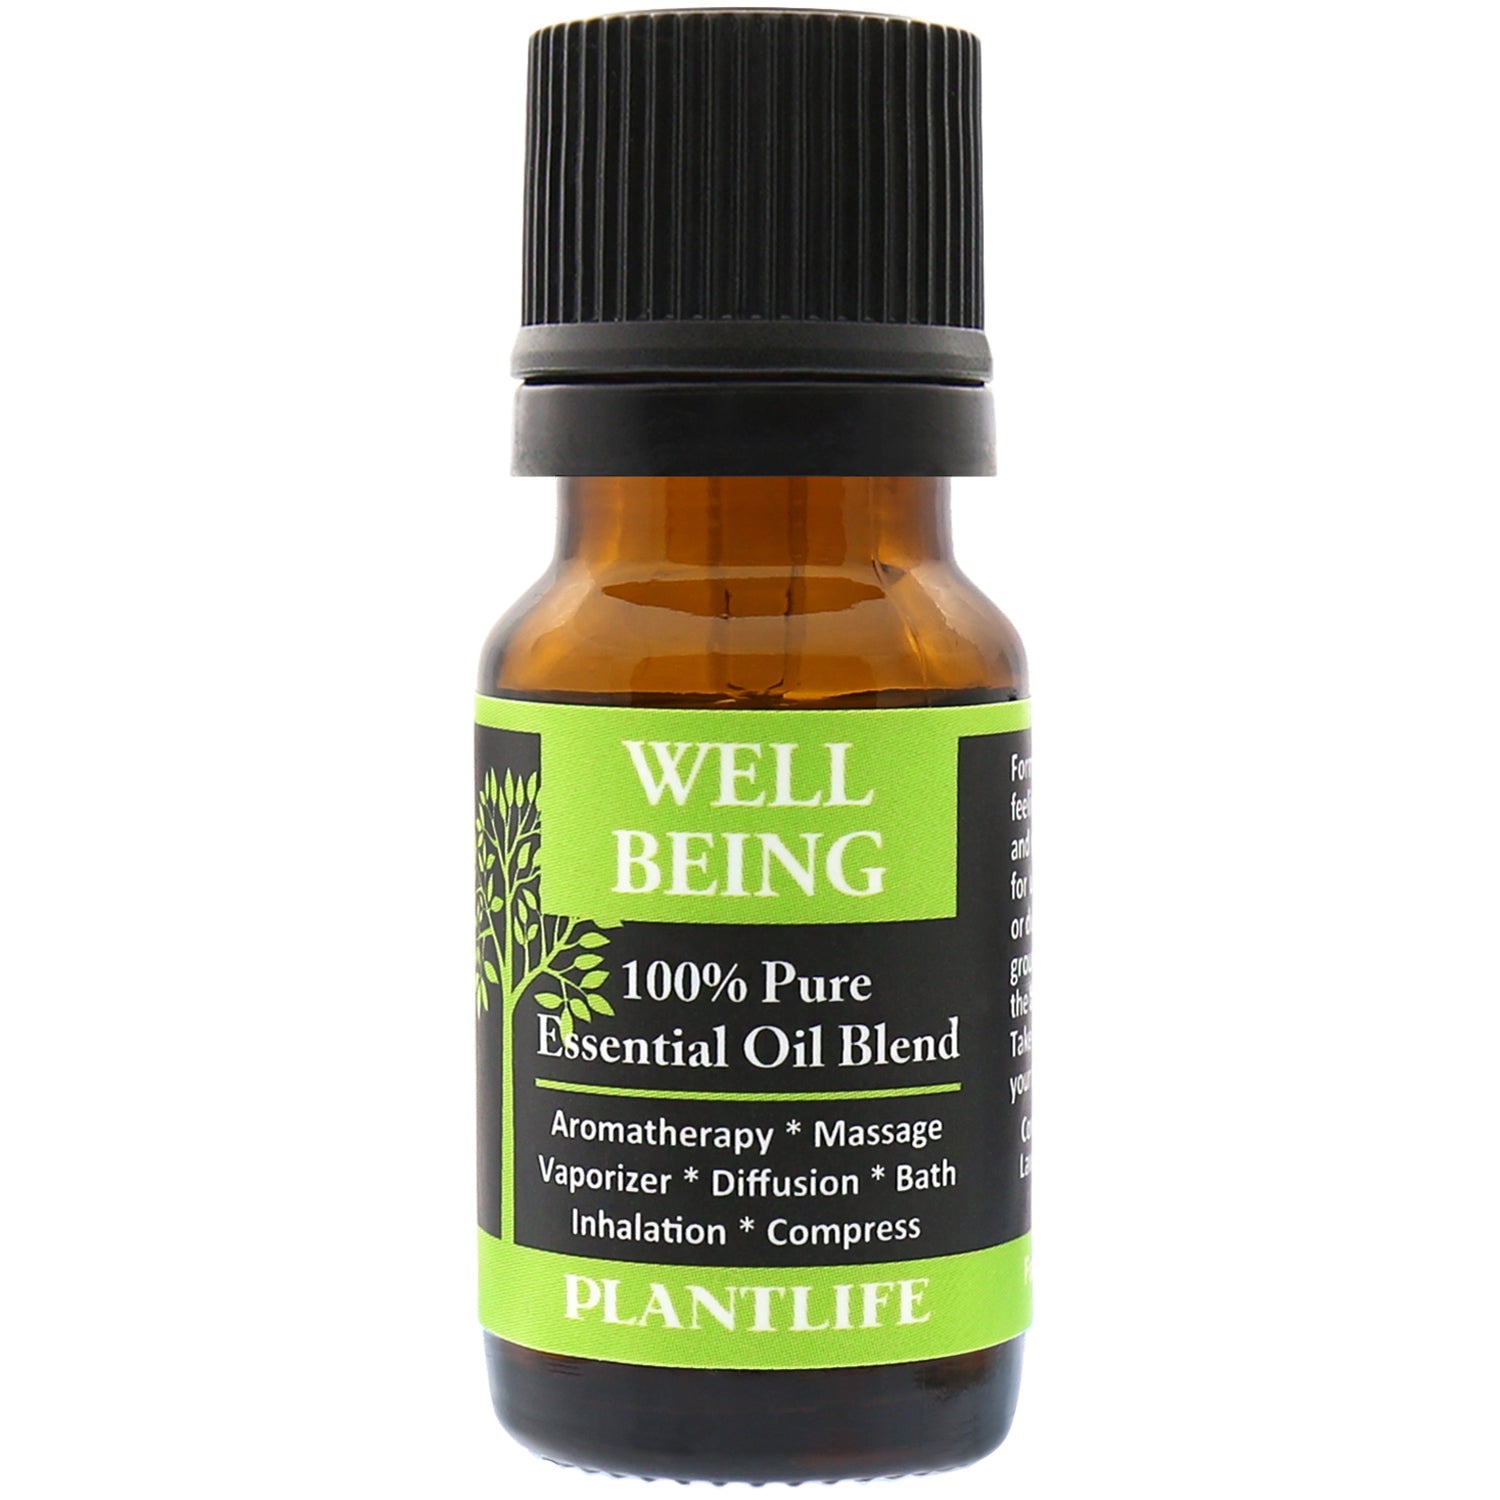 Well Being Essential Oil Blend